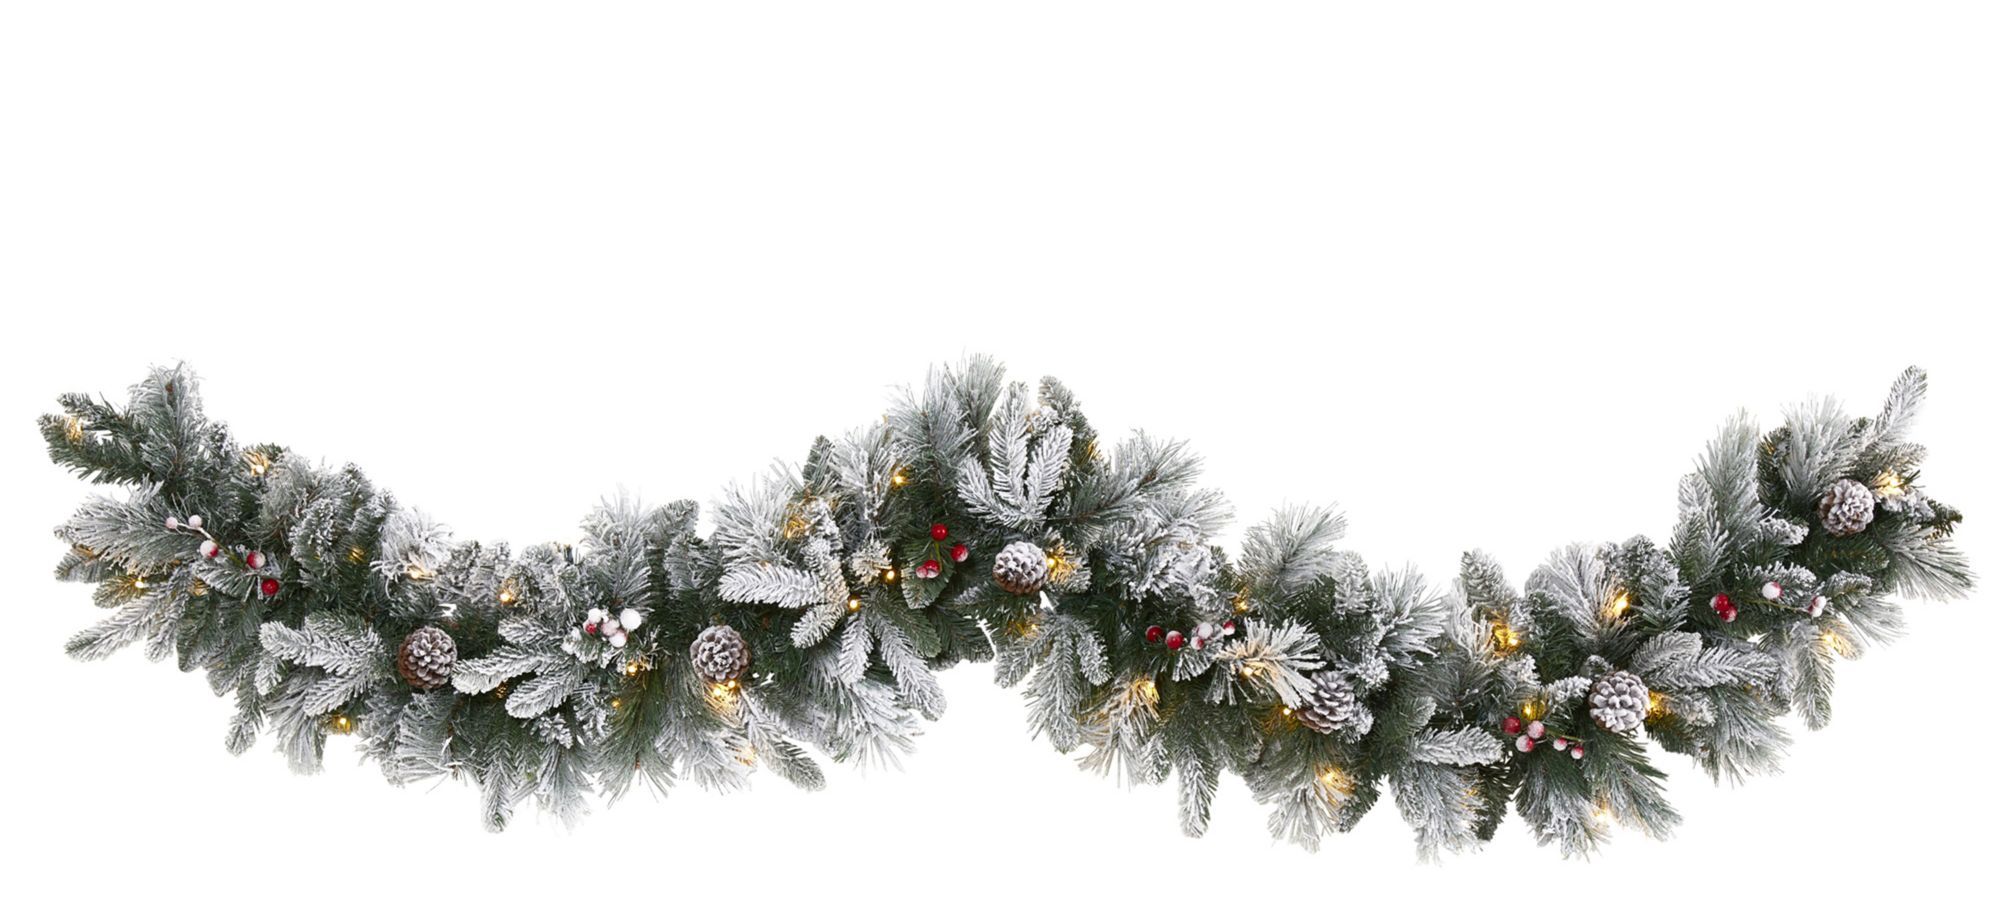 6ft. Pre-Lit Flocked Mixed Pine Artificial Christmas Garland in Green by Bellanest